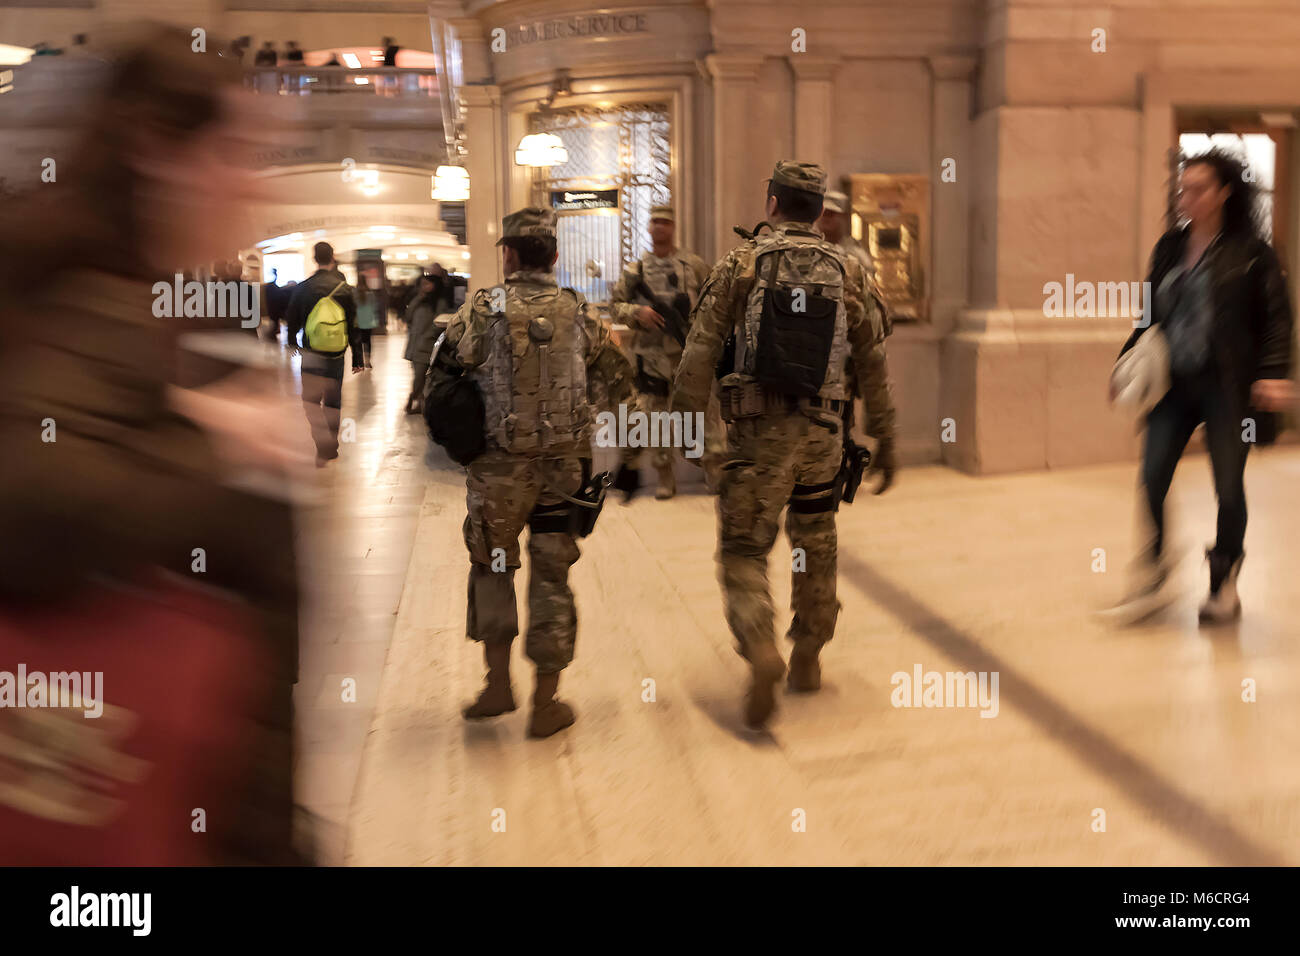 Army National Guard officers patrolling Grand Central Station, New York, NY,  USA. Stock Photo